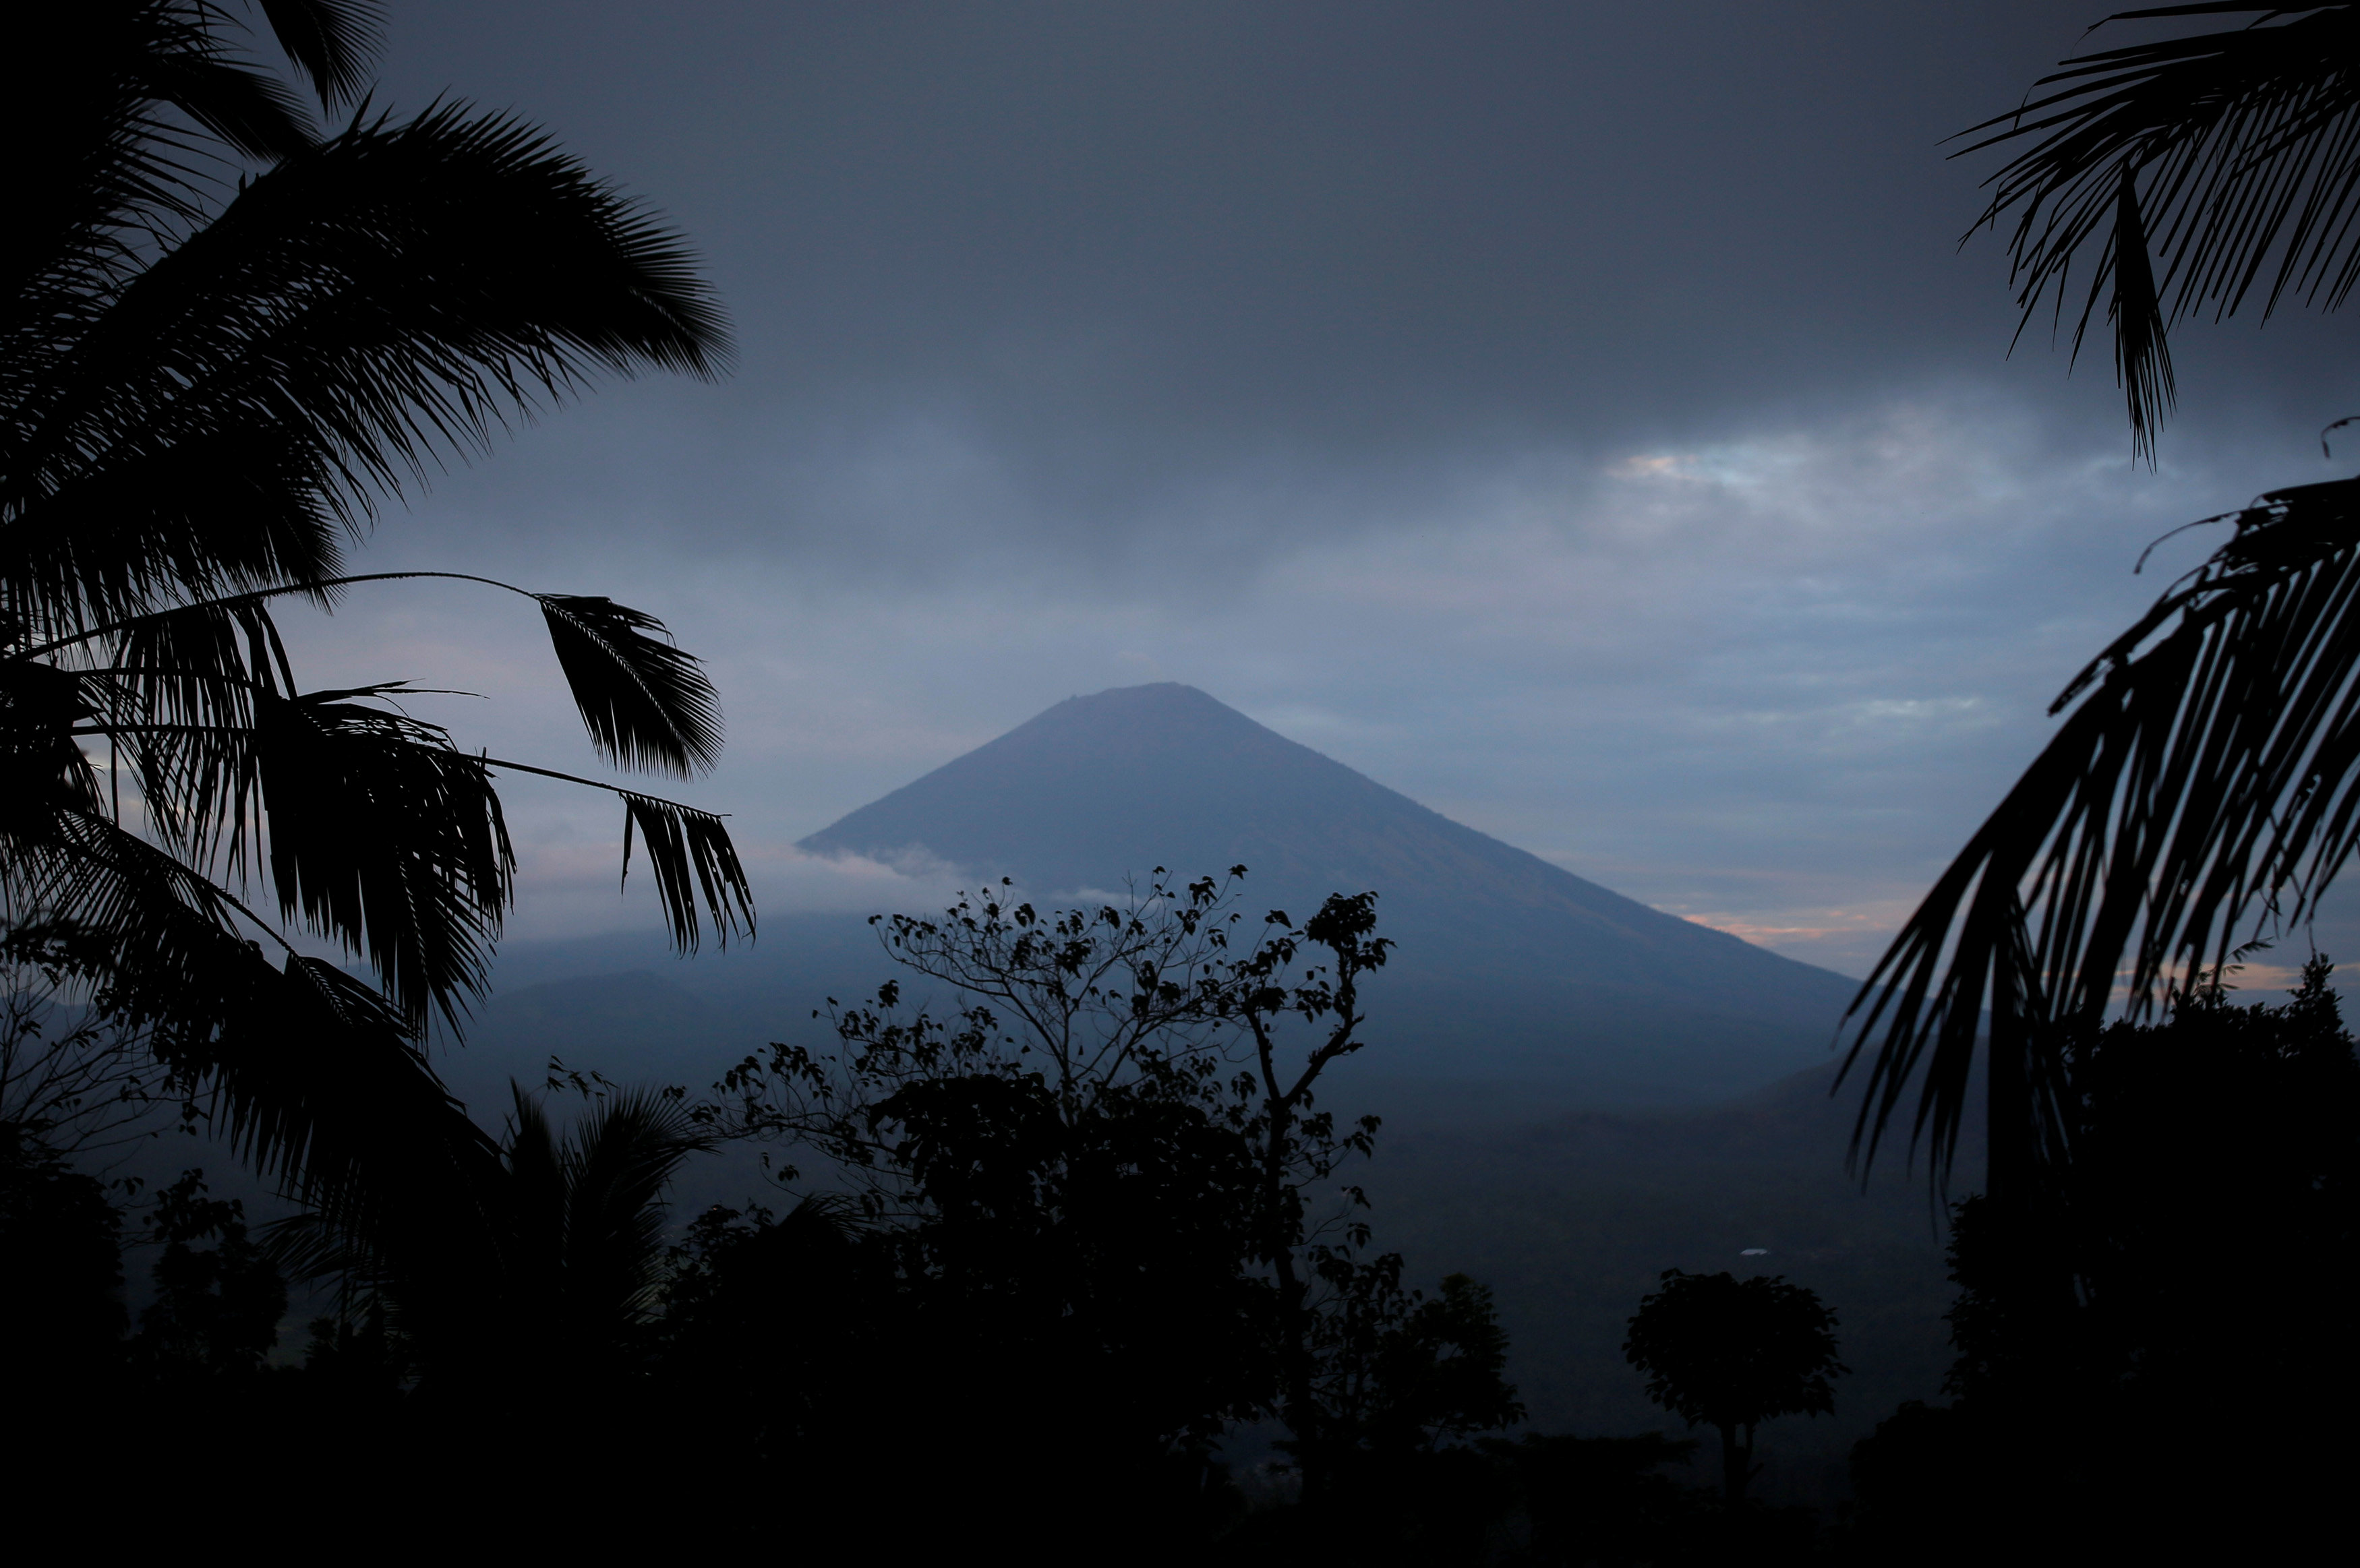 Bali's rumbling volcano sparks travel warnings from U.S, UK, Australia and Singapore